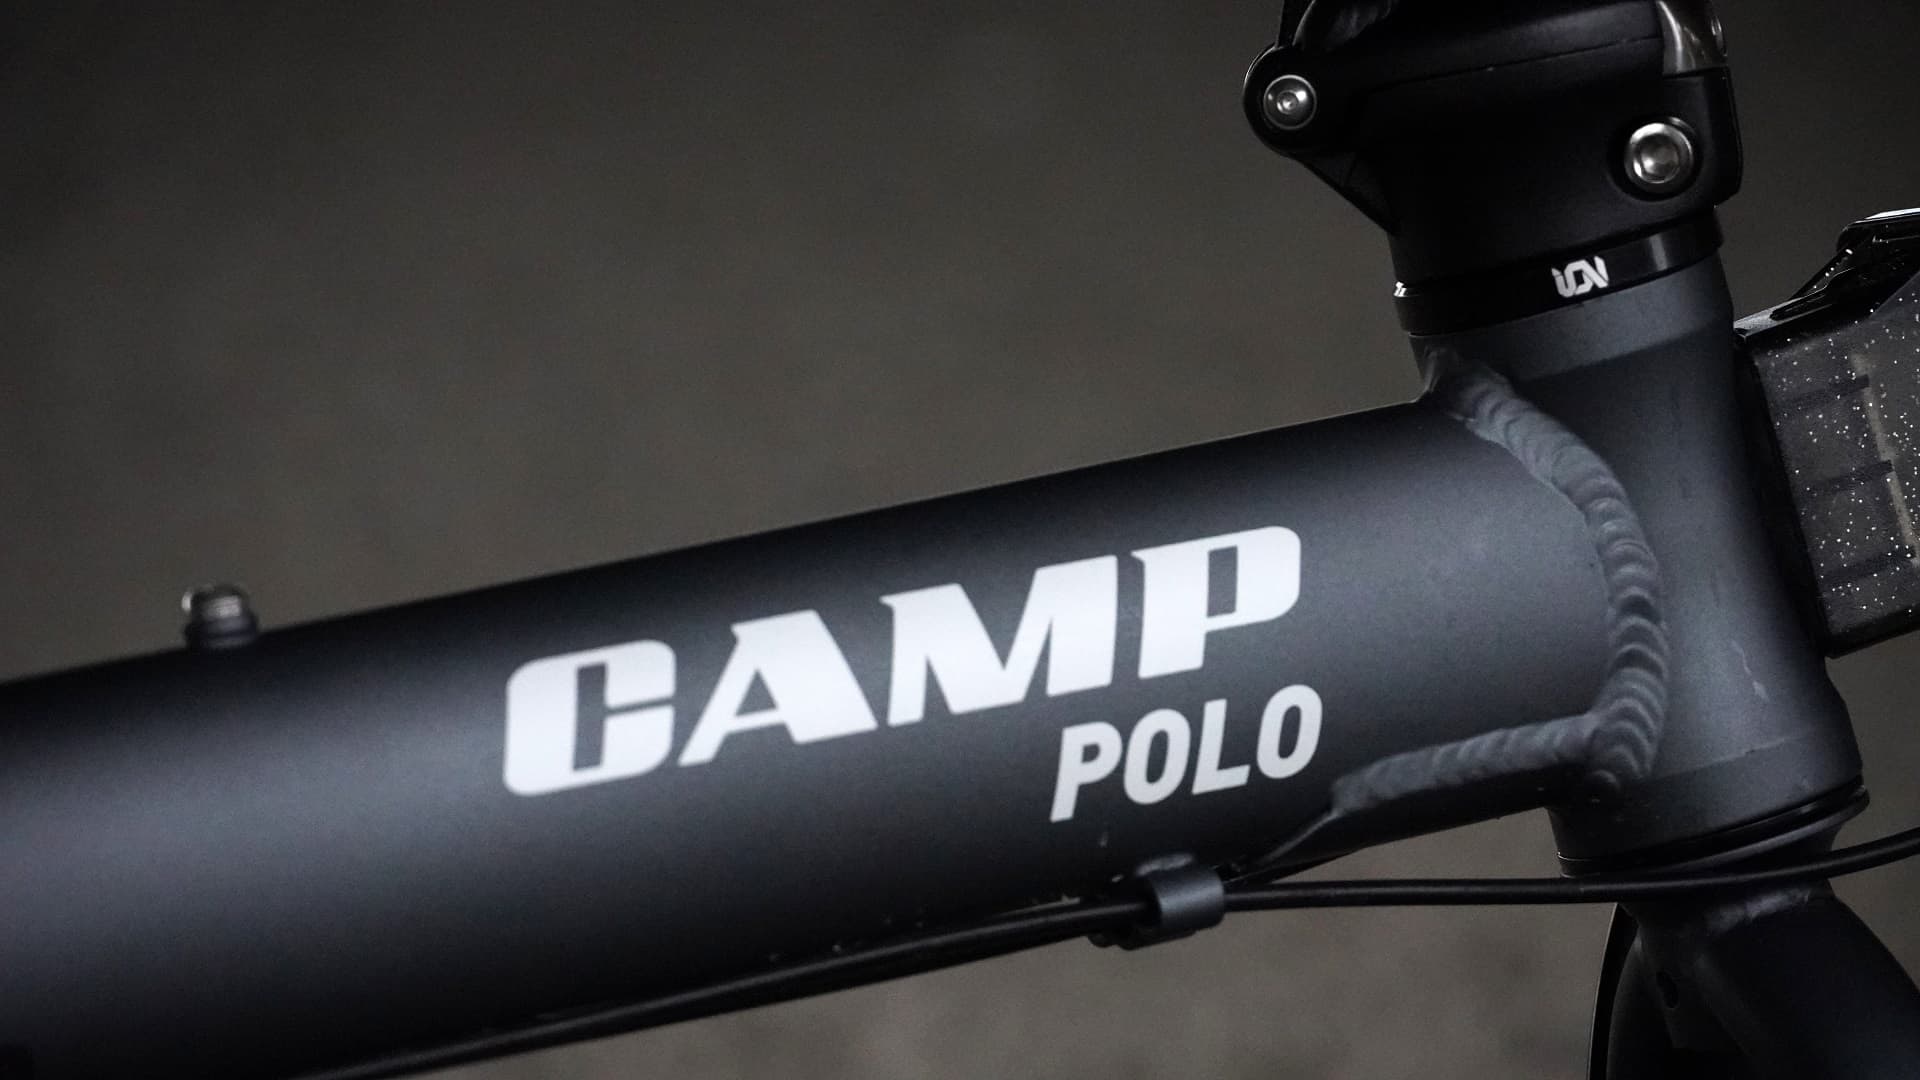 CAMP POLO (BLACK) foldable bicycle at float (2)